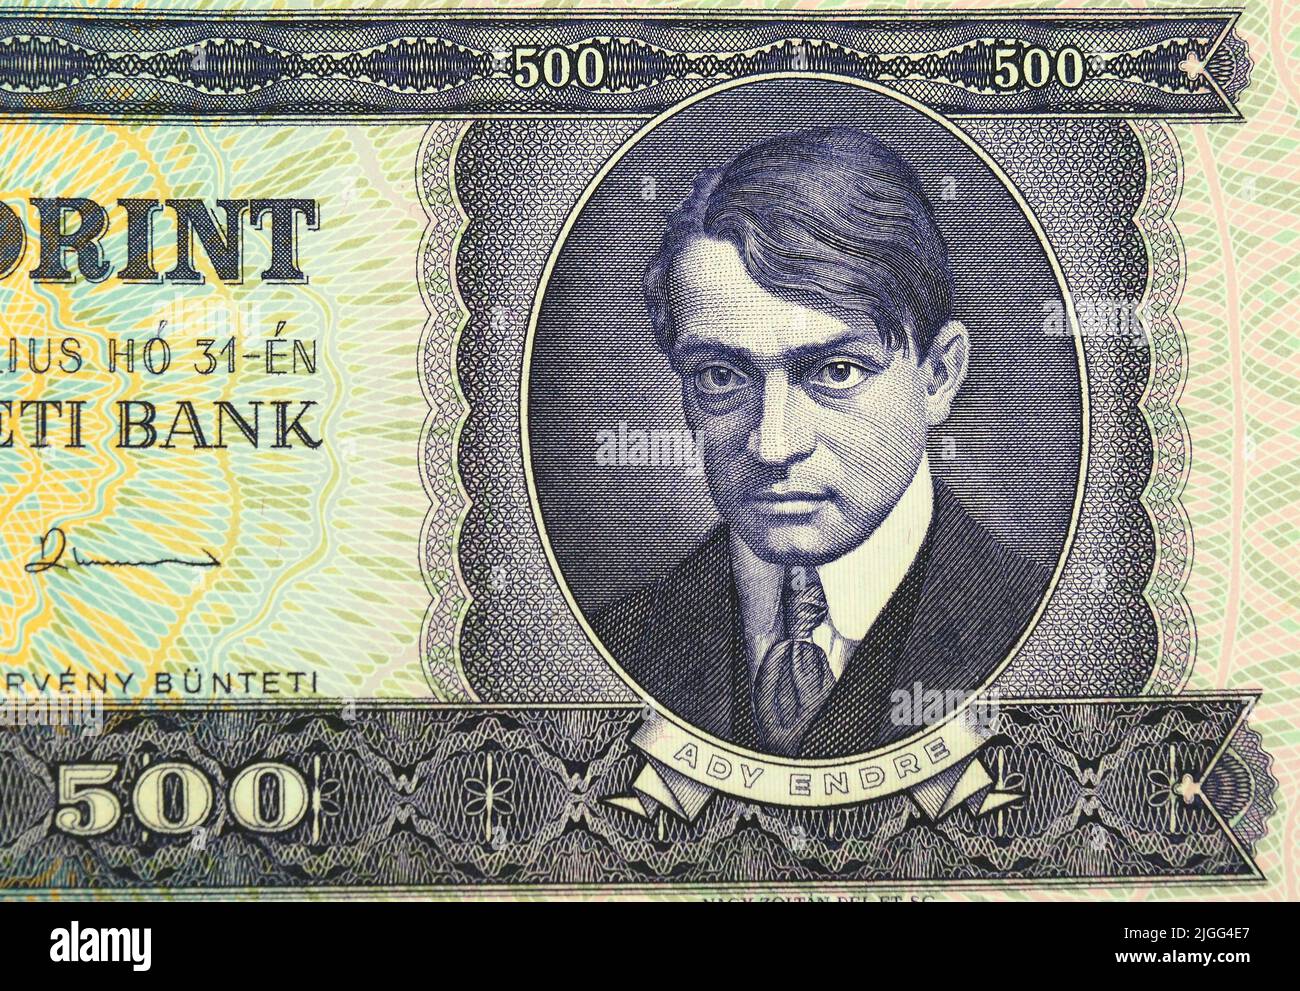 old five hundred HUF banknote (1969-1999), Endre Ady poet, hungarian forint, Hungary, Magyarország, Europe Stock Photo